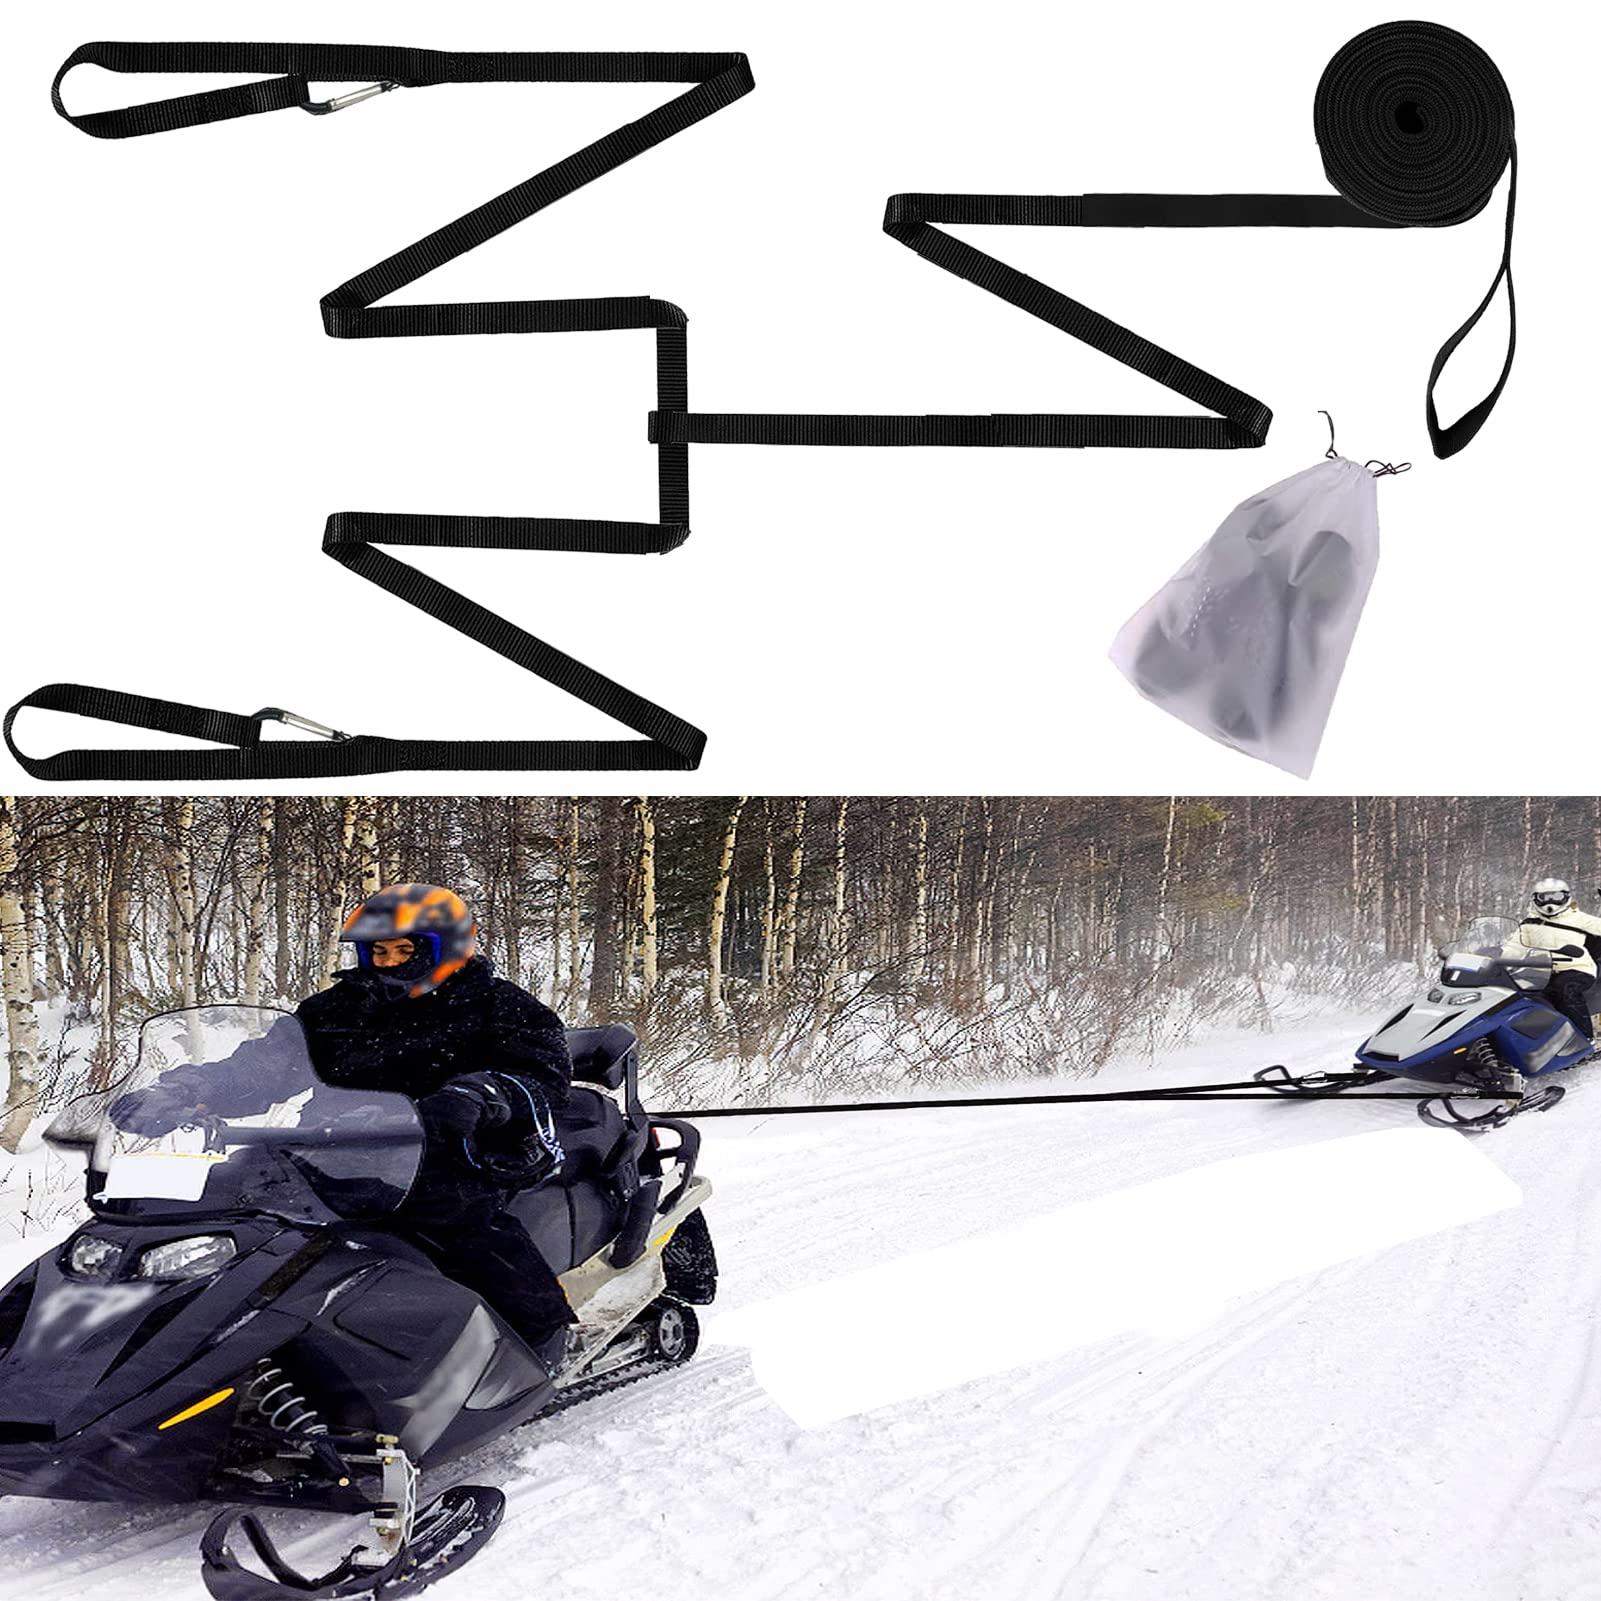 Snowmobile Tow Strap Heavy Duty with Hook, Emergency Snowmobile Tow Rope,  Quick Hook Up and Tow